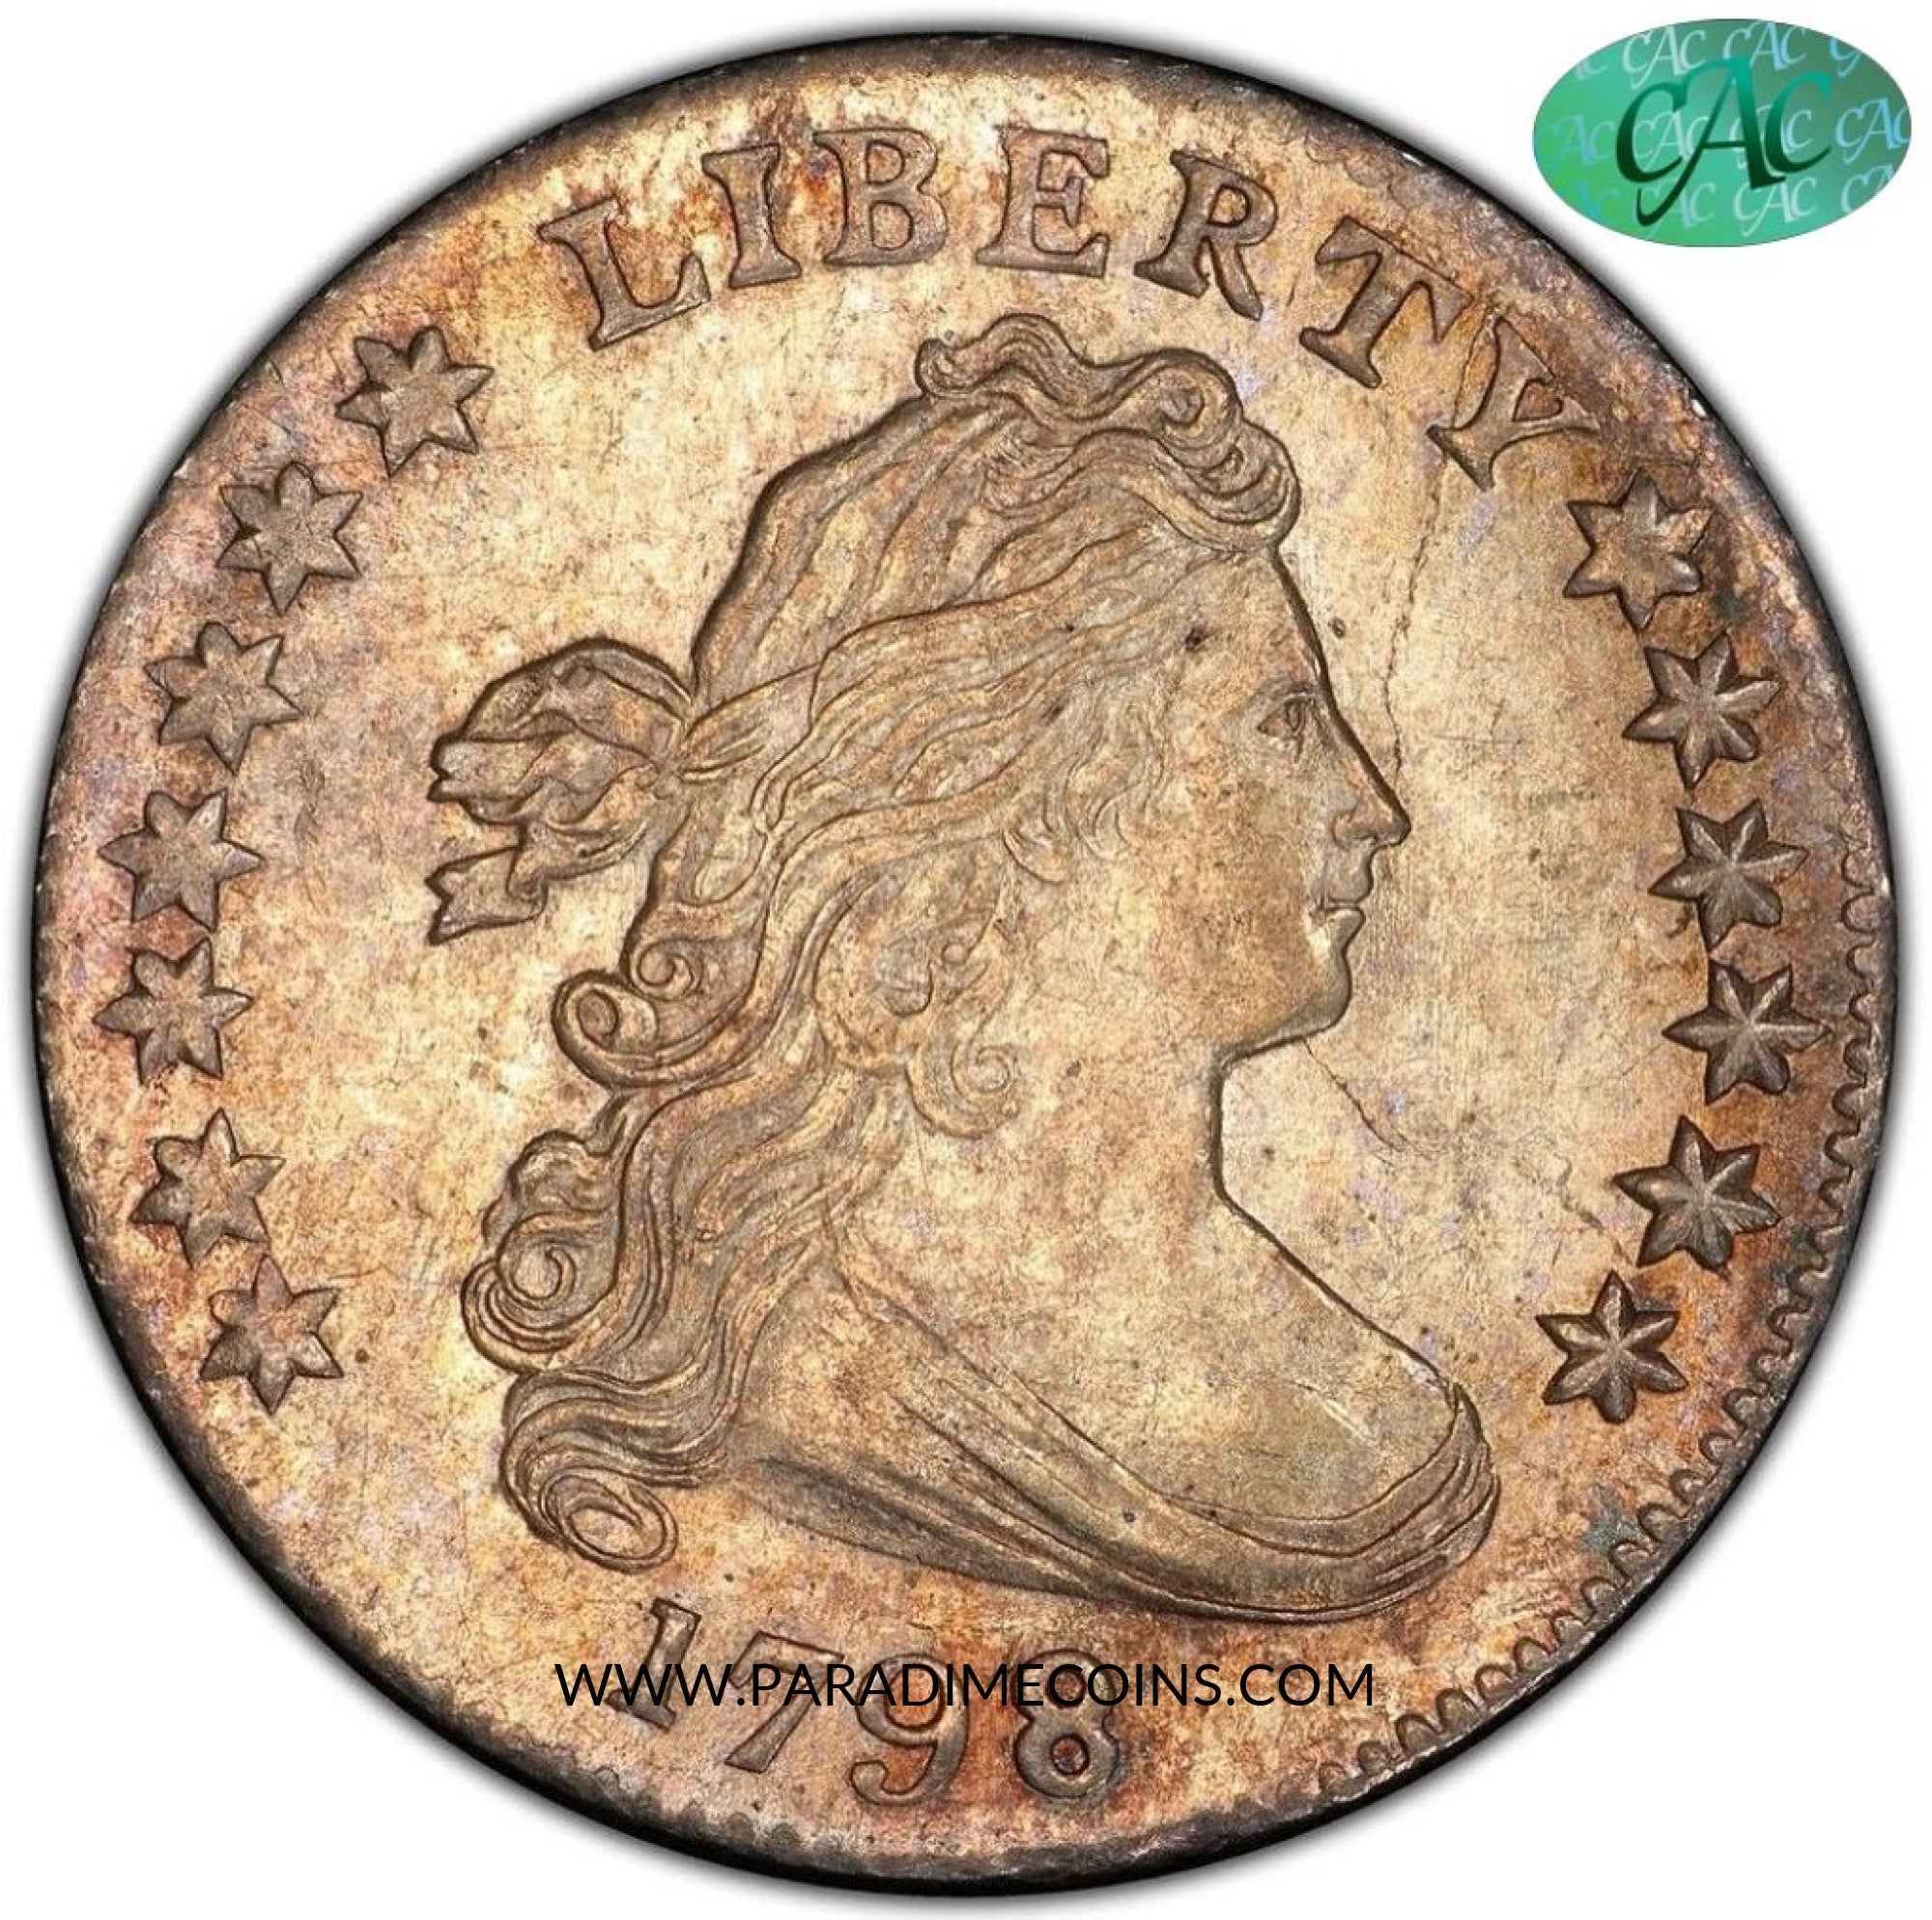 1798 LARGE 10C MS64 PCGS CAC - Paradime Coins | PCGS NGC CACG CAC Rare US Numismatic Coins For Sale